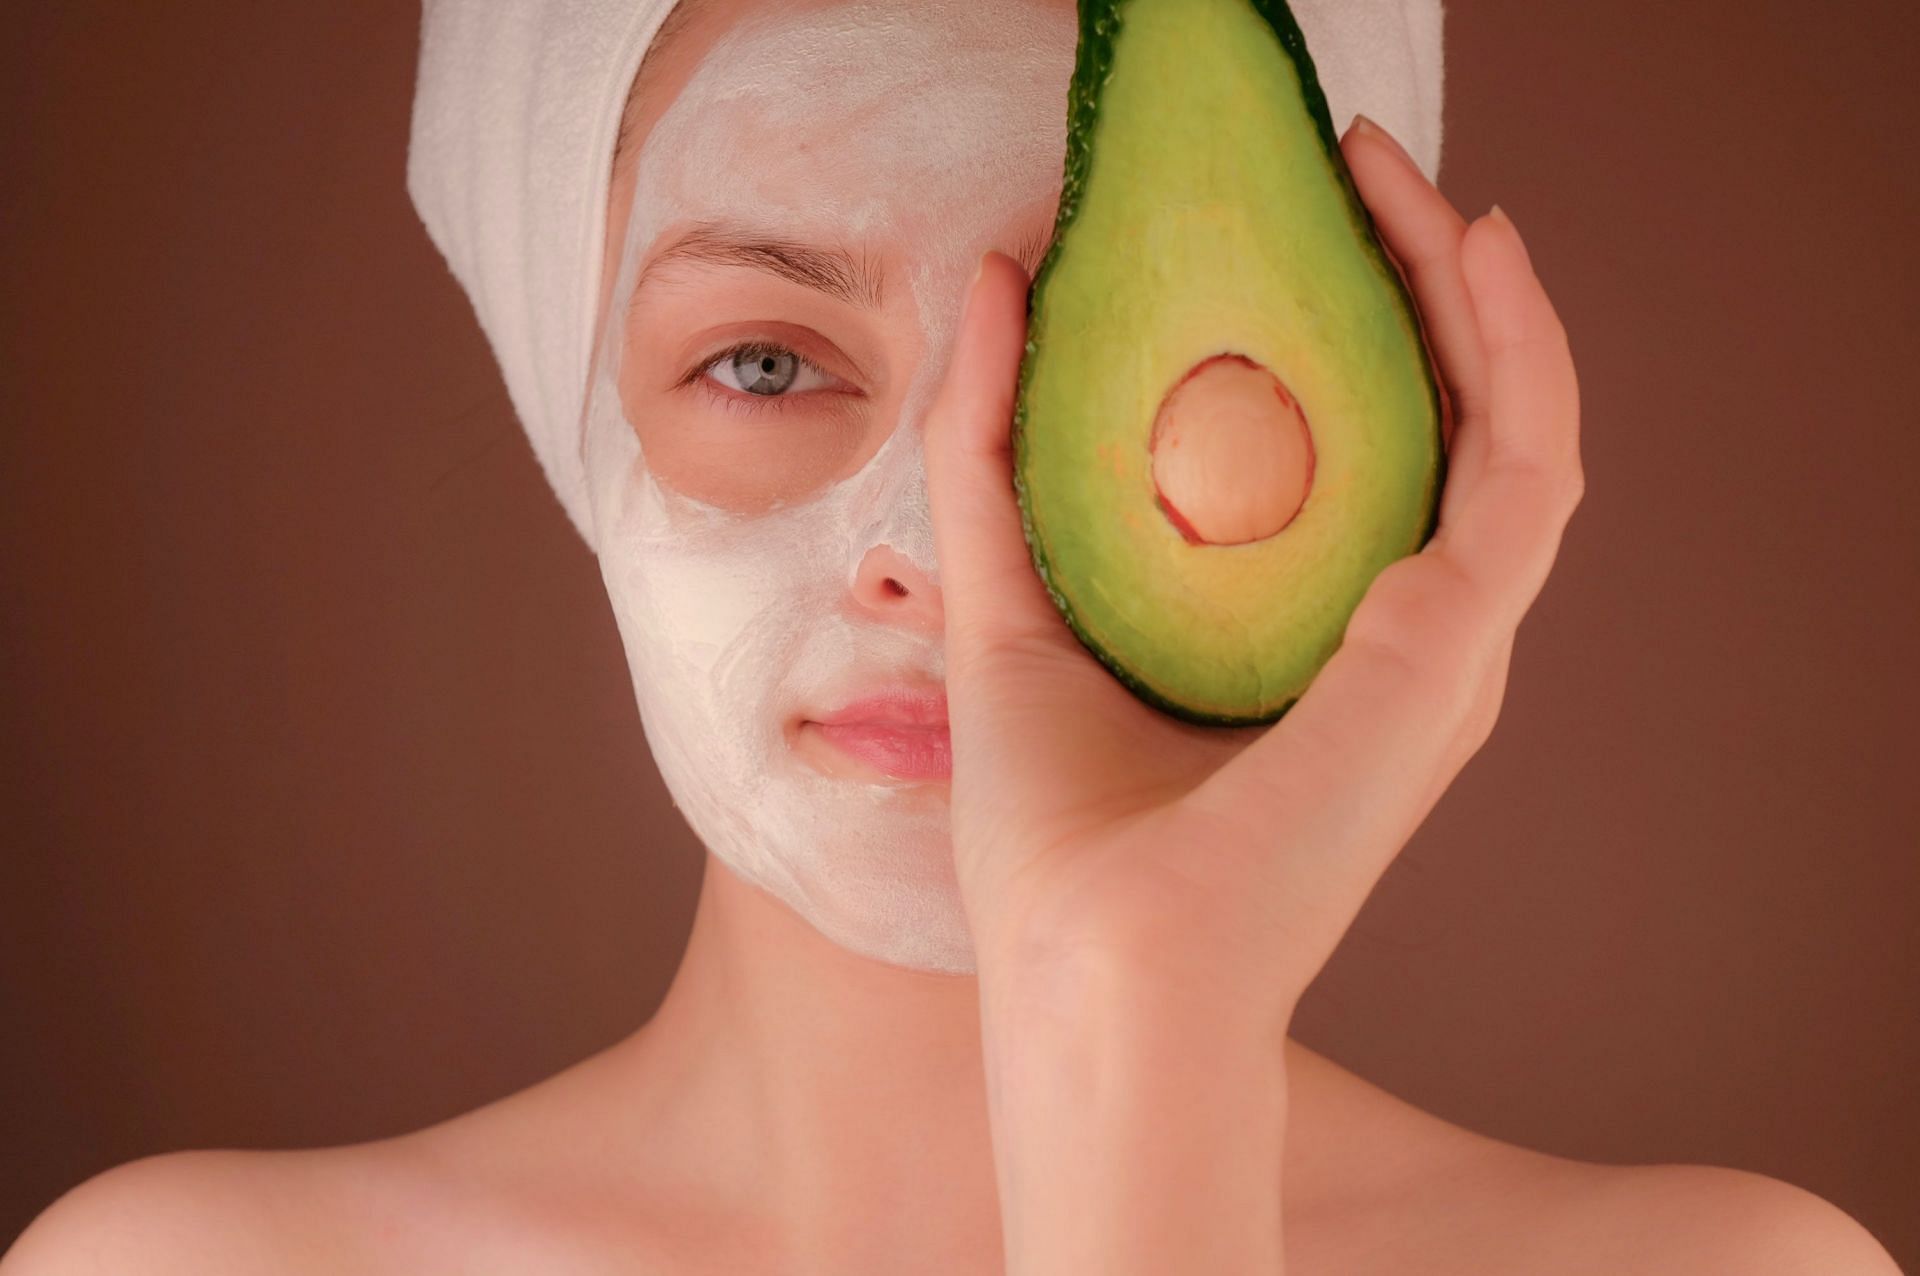 long list of health benefits of avocado for skin in addition to being a nutrient-dense superfruit. (Image via Unsplash/ Kimia Zarifi)